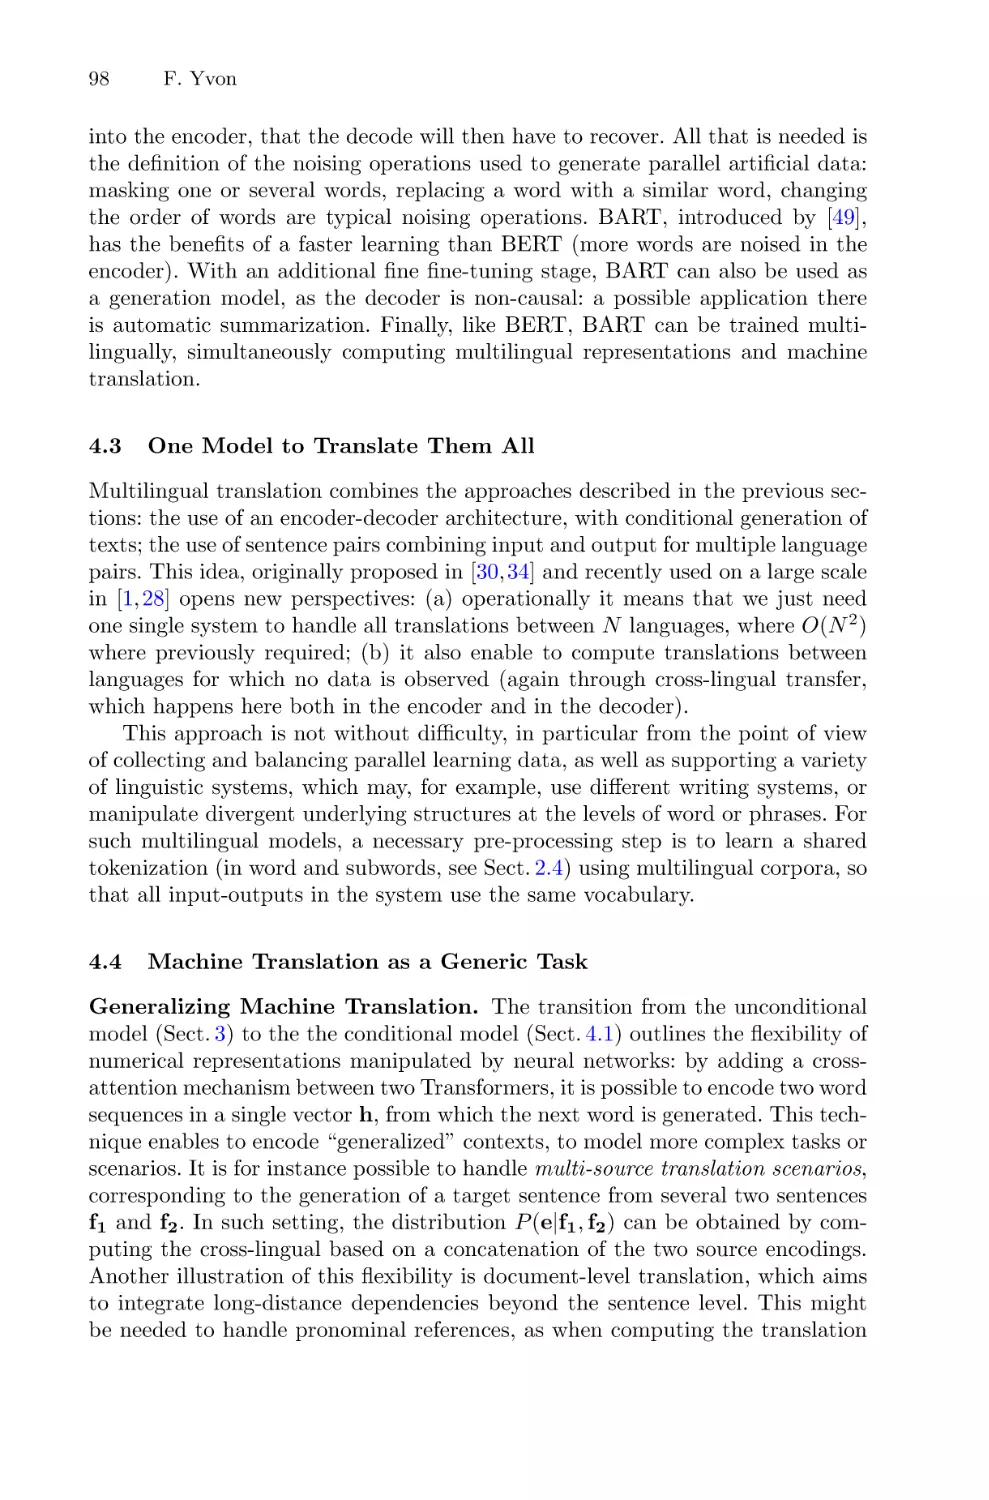 4.3 One Model to Translate Them All
4.4 Machine Translation as a Generic Task